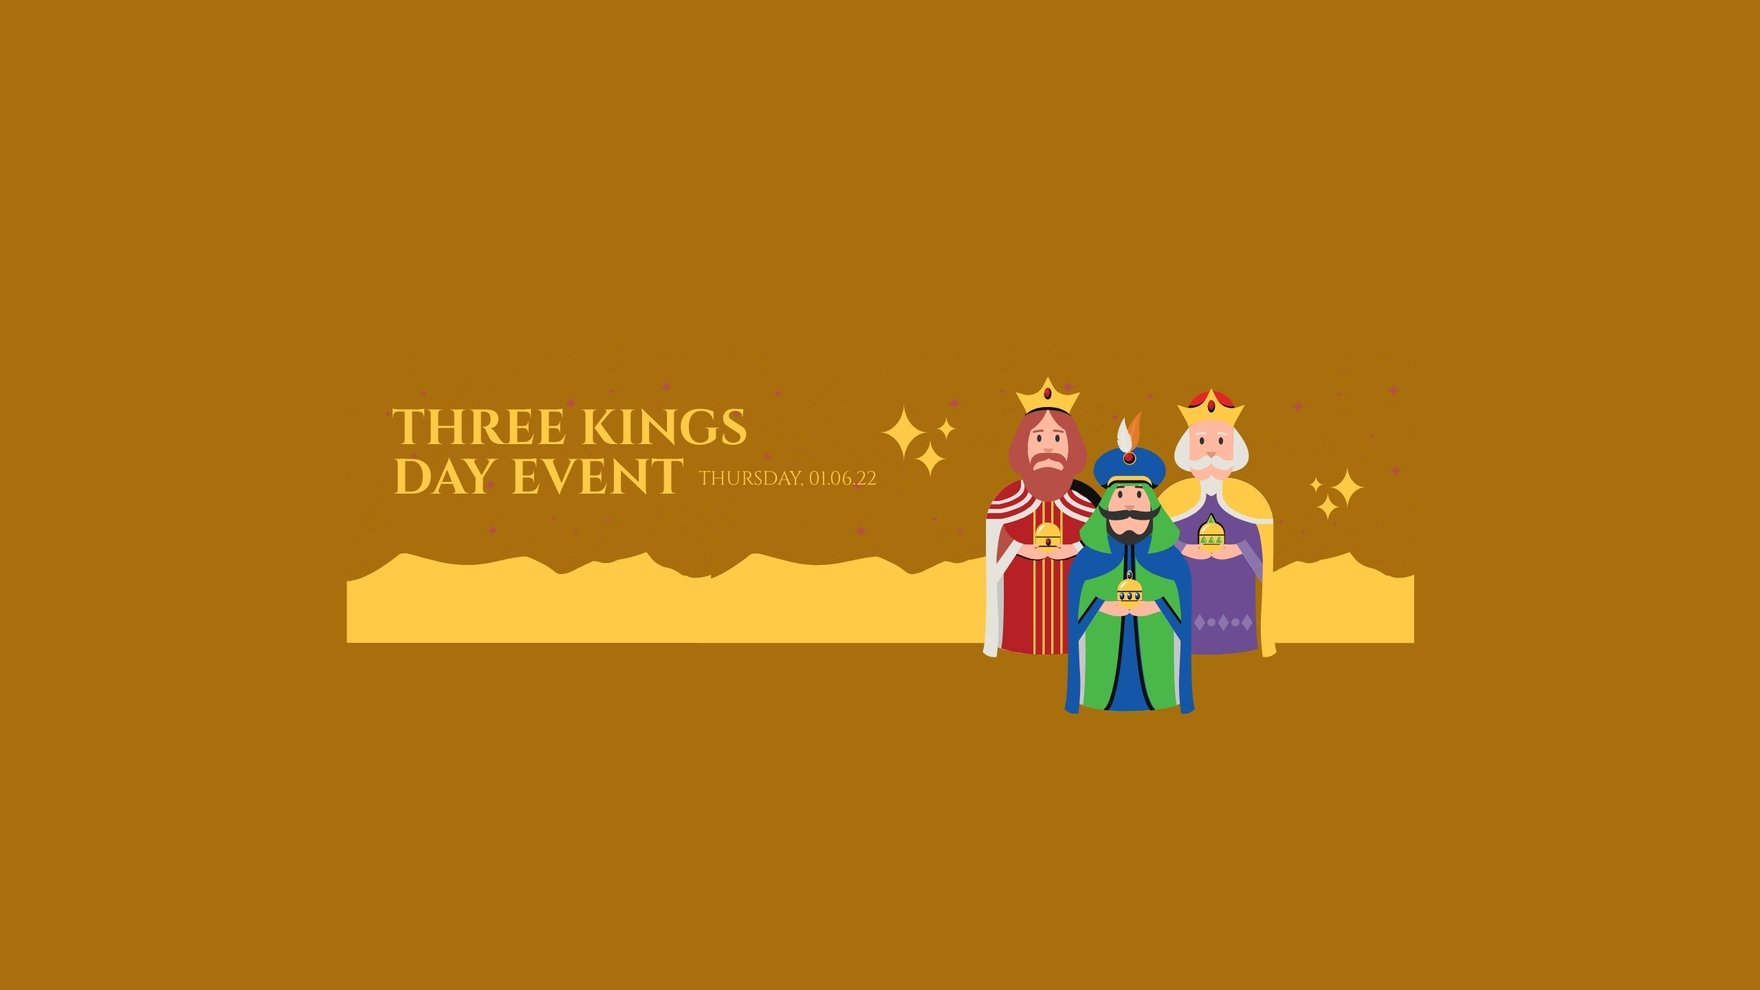 Three Kings Day Event Youtube Banner Template